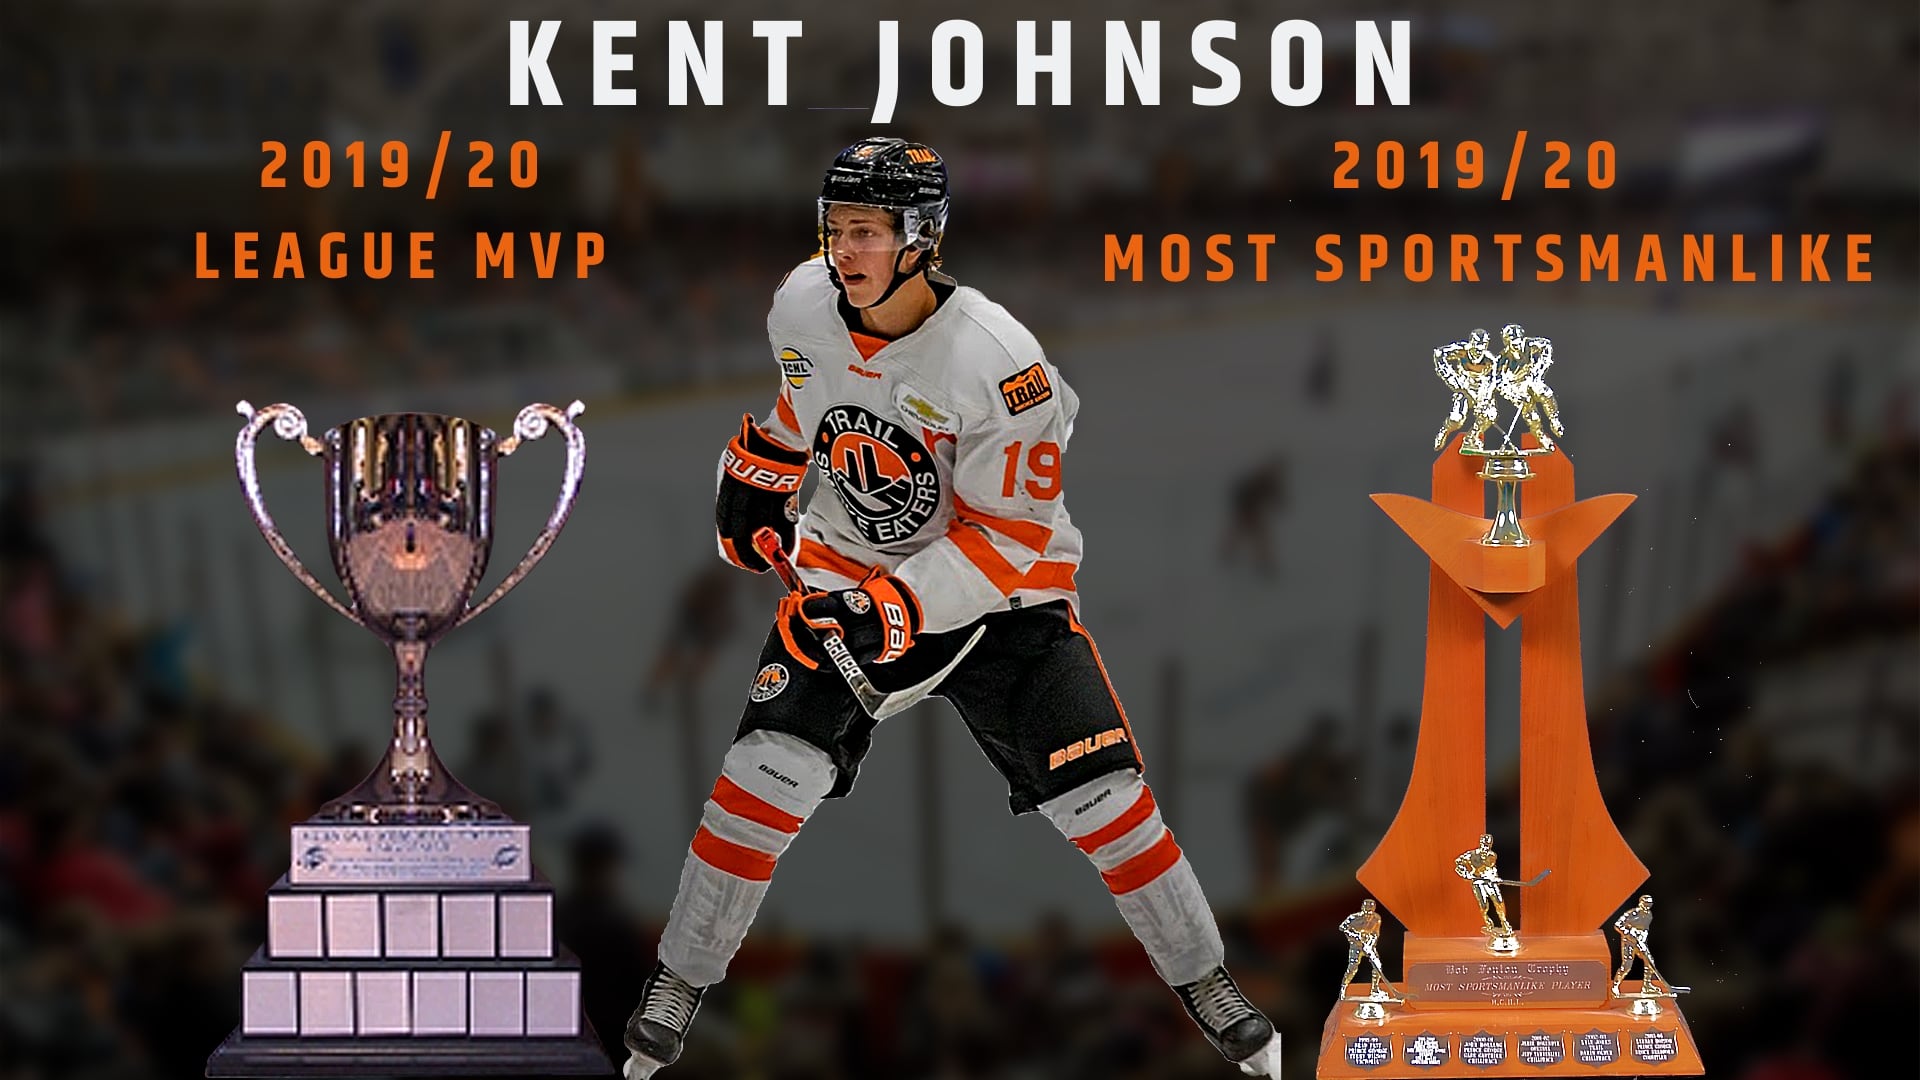 Kent Johnson named League MVP and Most Sportsmanlike while Logan Terness takes home Rookie of the Year award